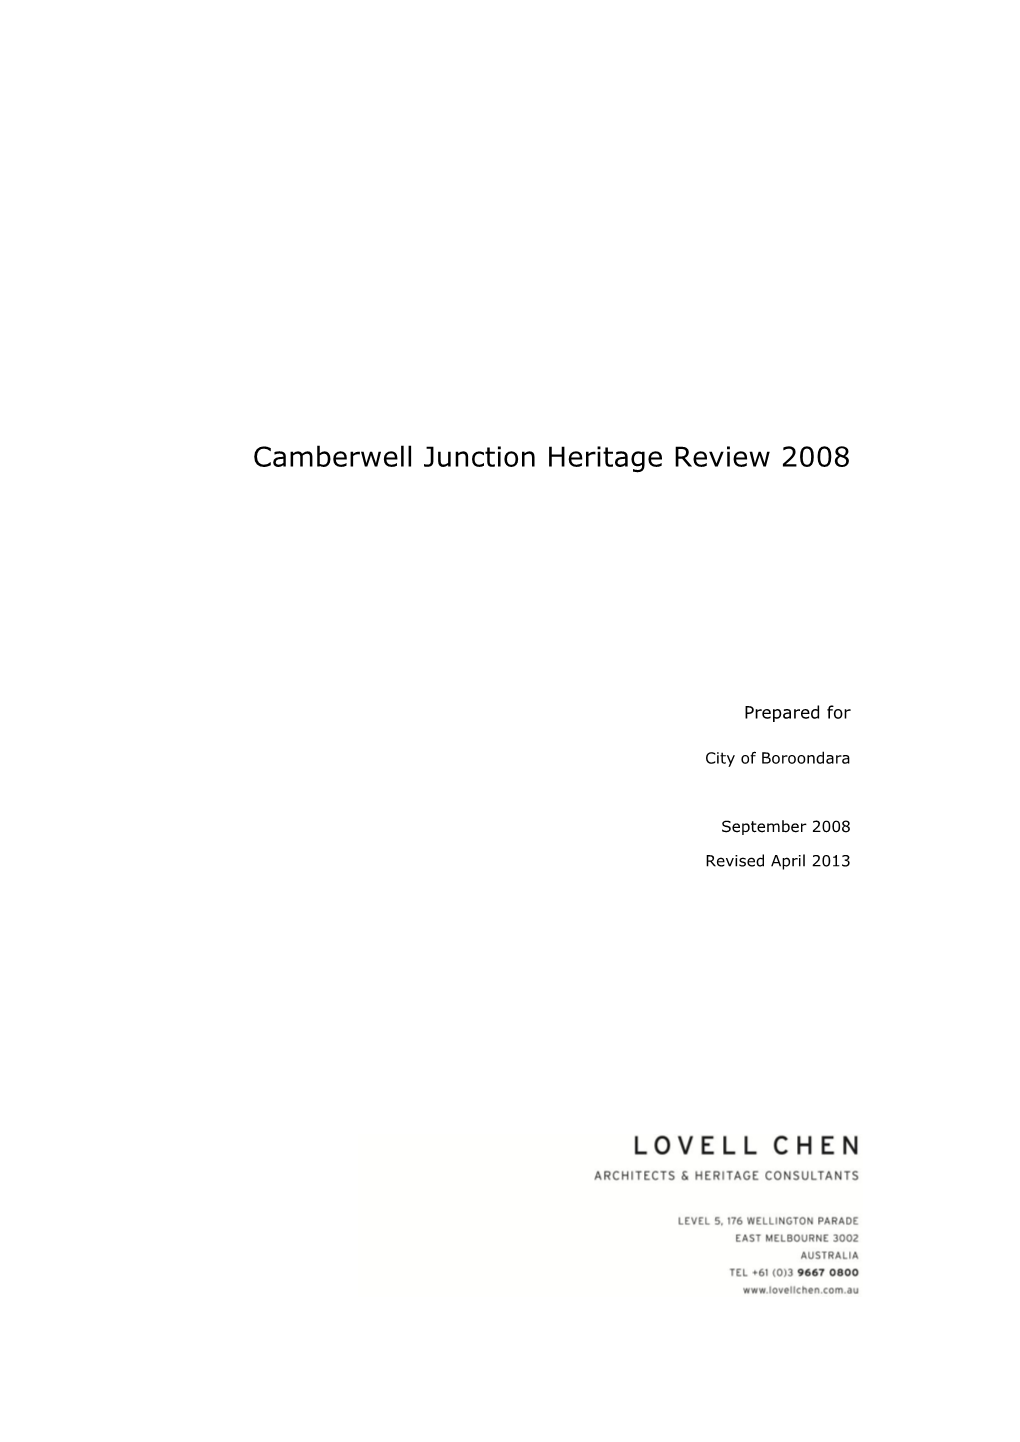 Camberwell Junction Heritage Review 2008